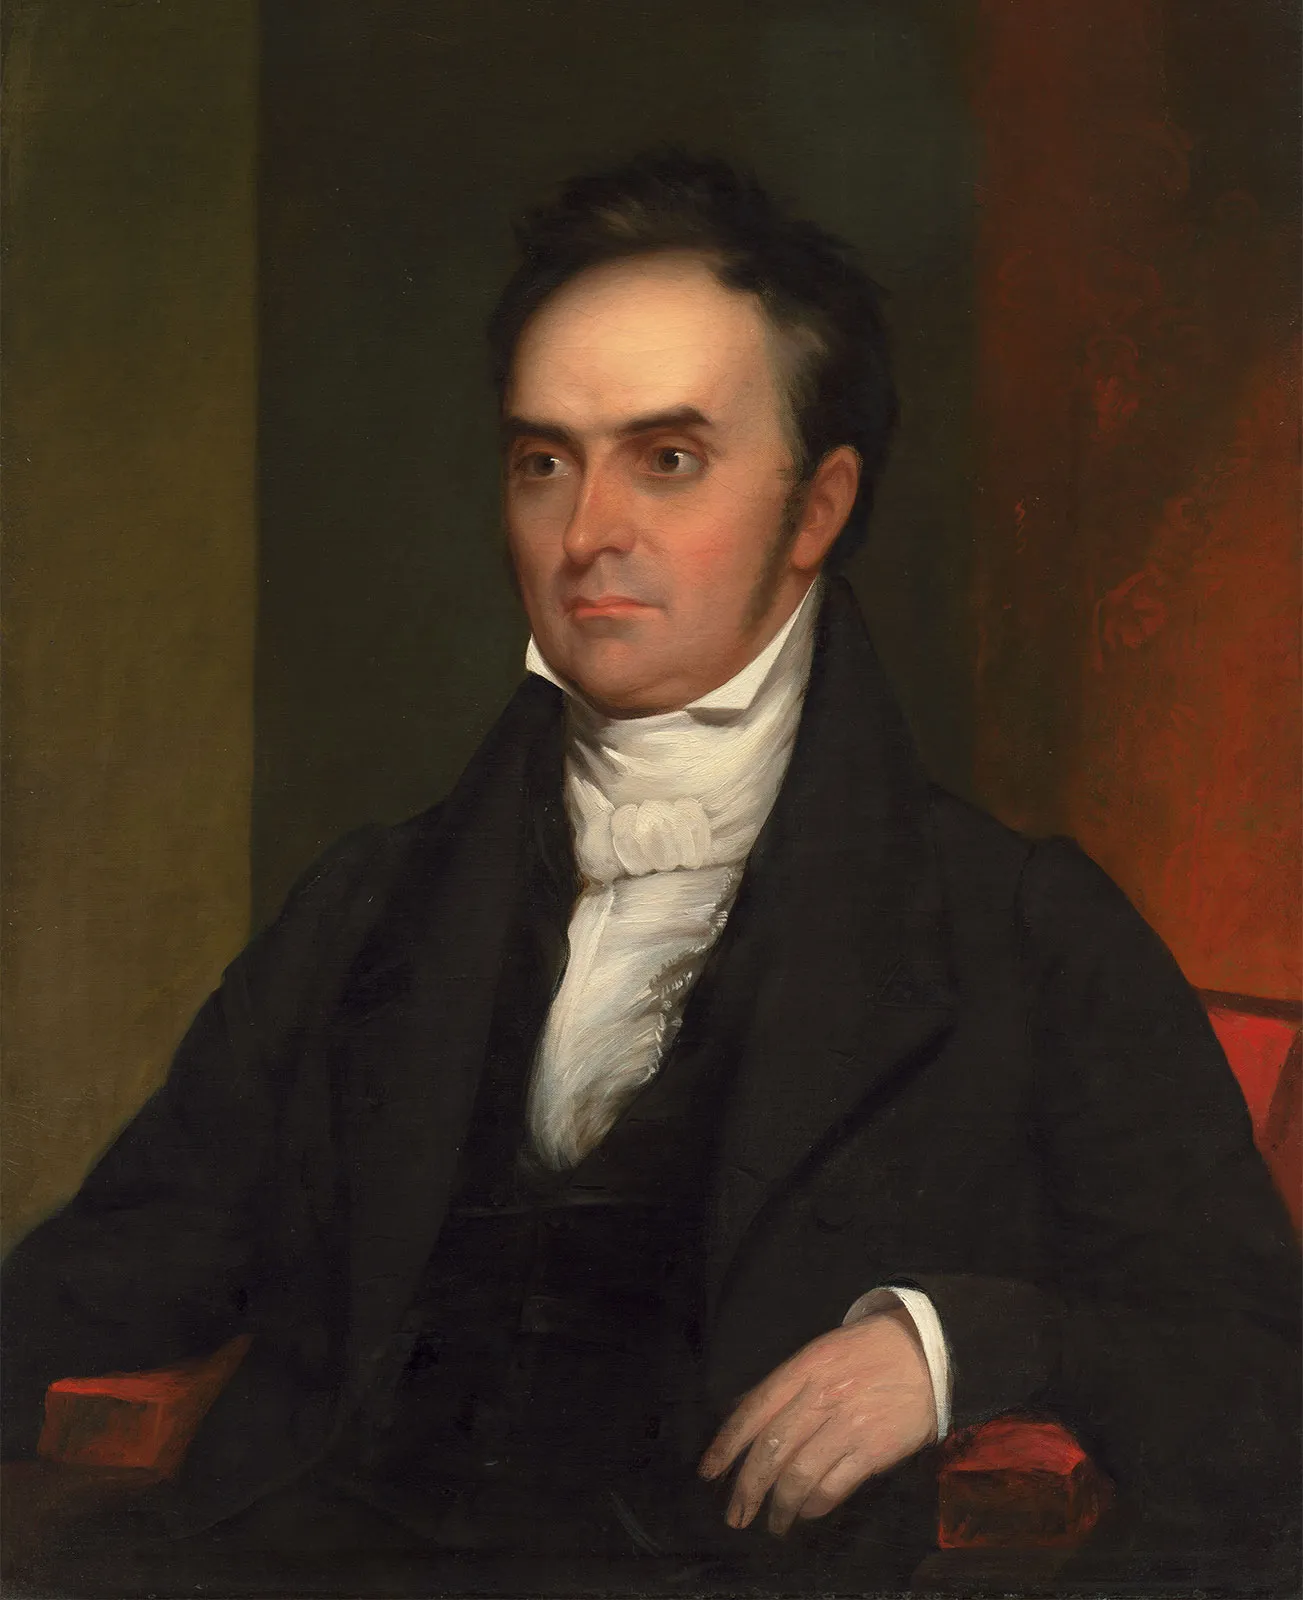 Remembering Daniel Webster This Election Day